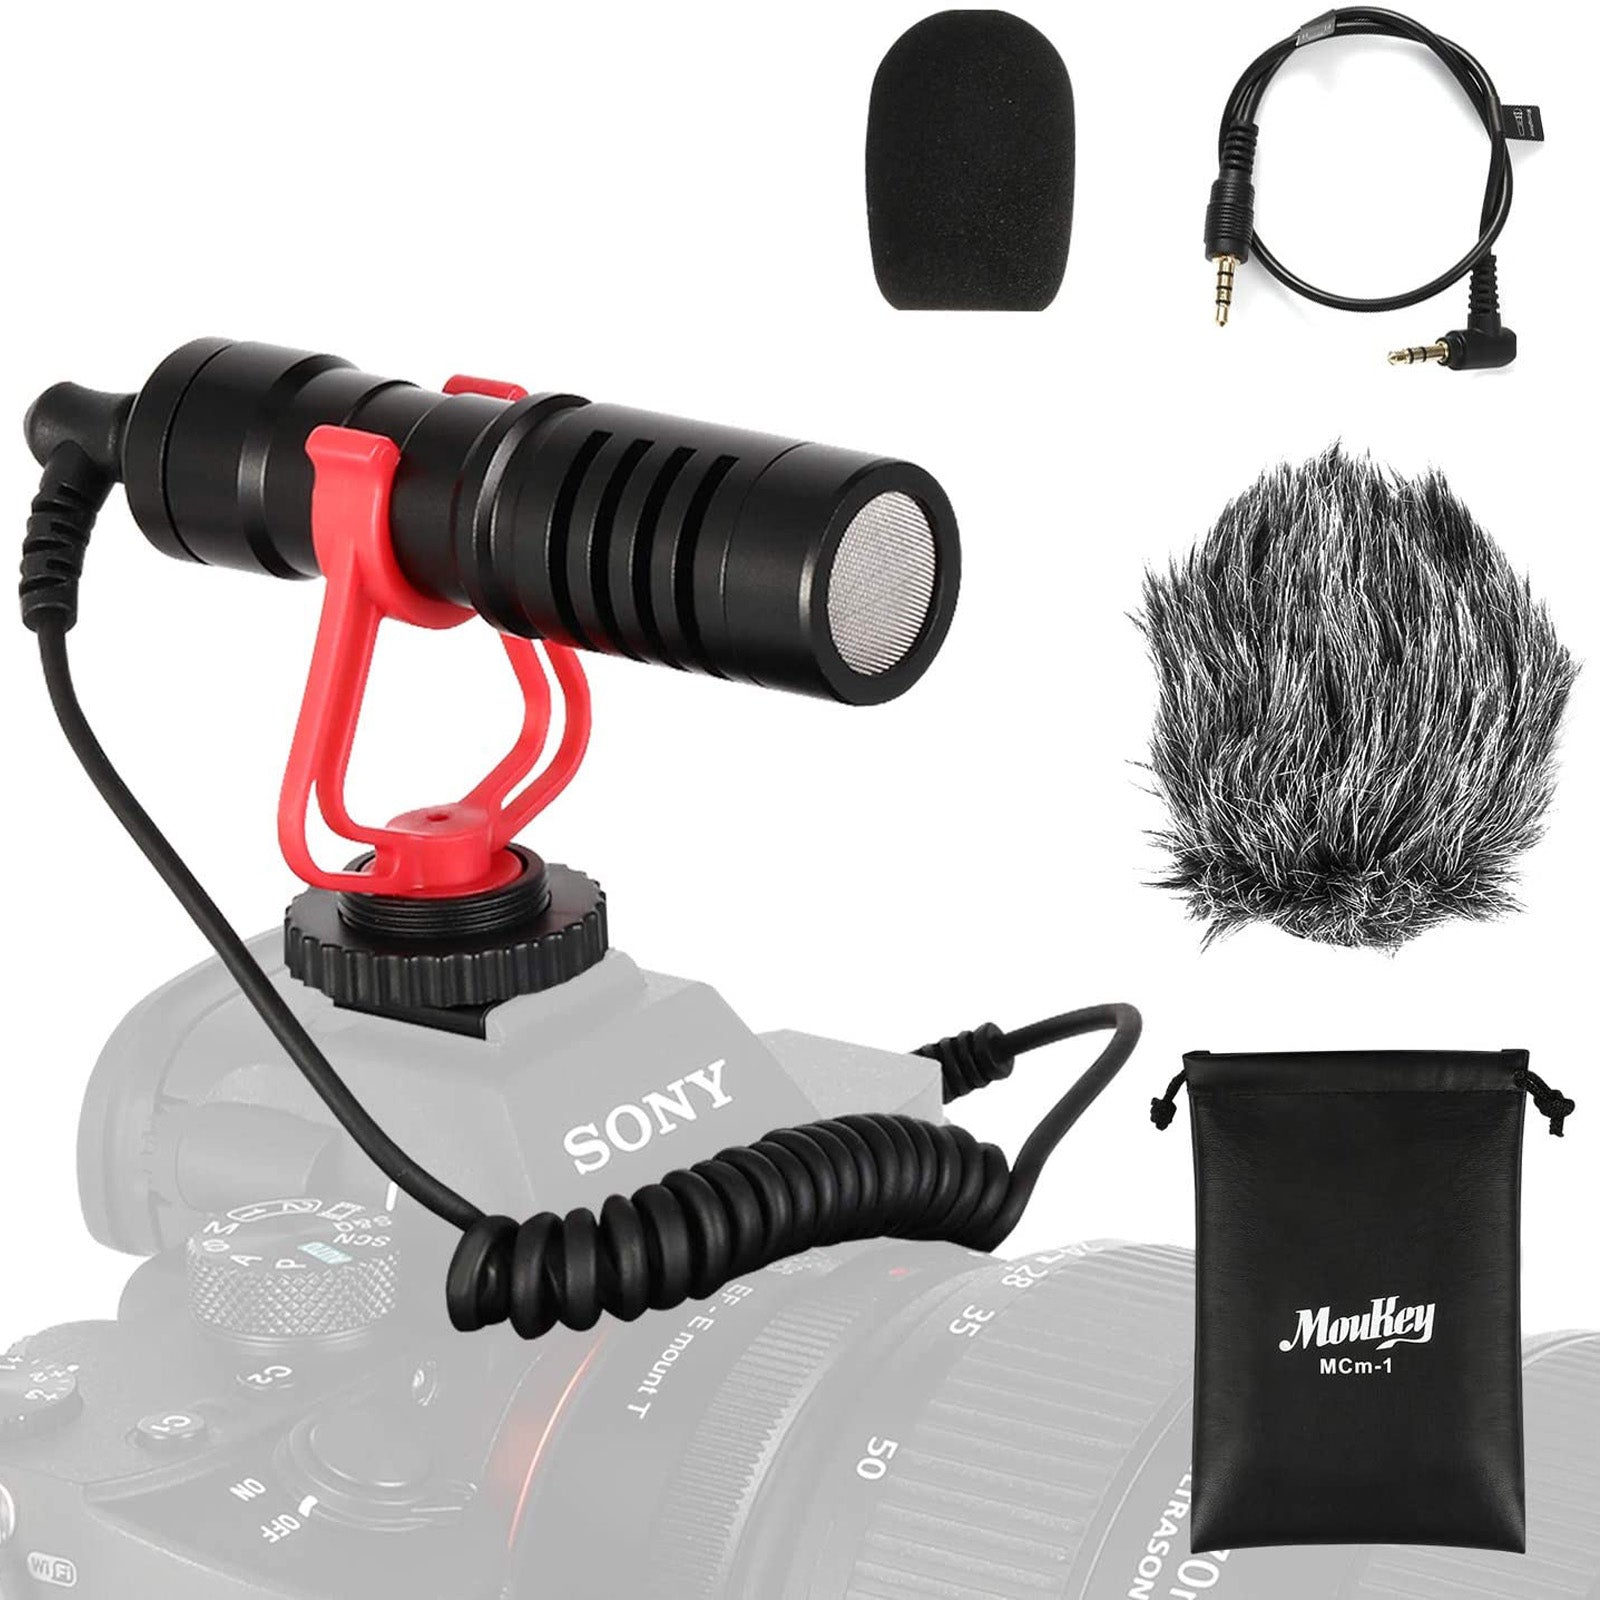 

MouKey MCm-1 Universal Video Camera Microphone with Integrated shock-mount